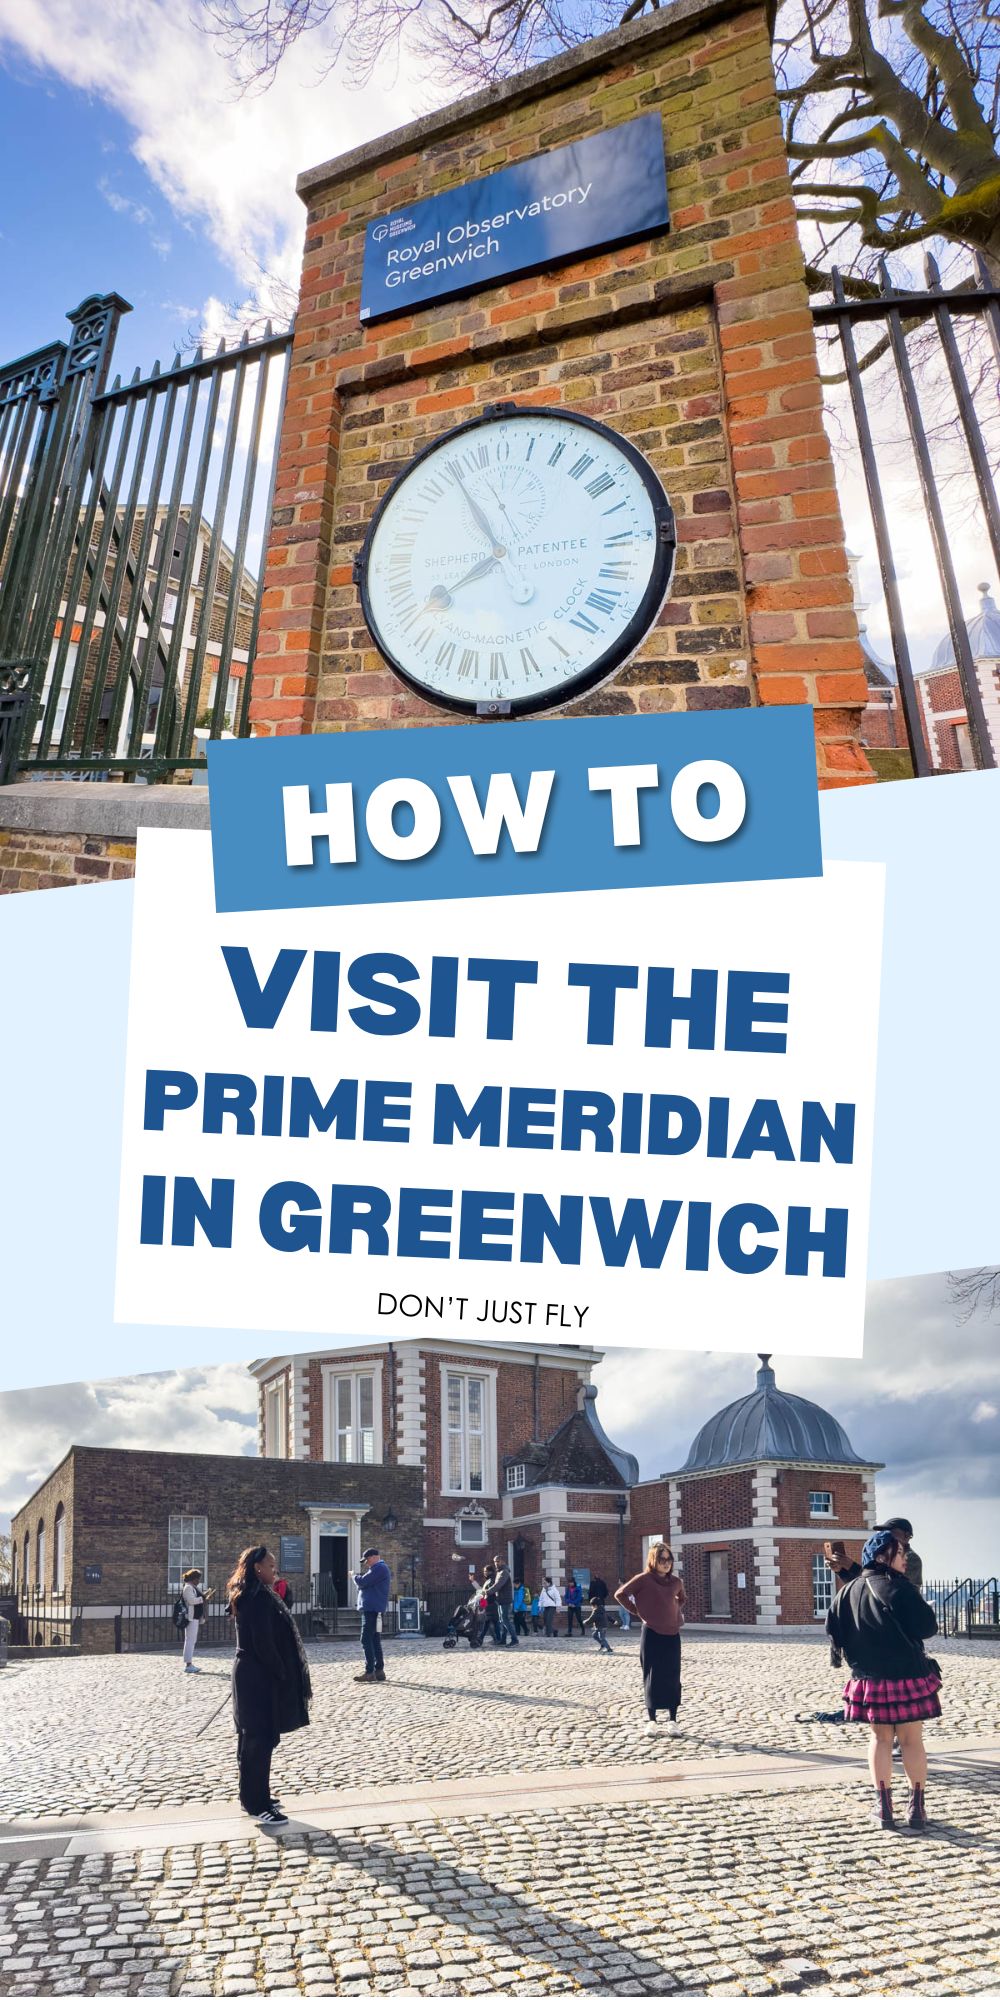 The photo collage shows the Prime Meridian line at the Greenwich Observatory. 